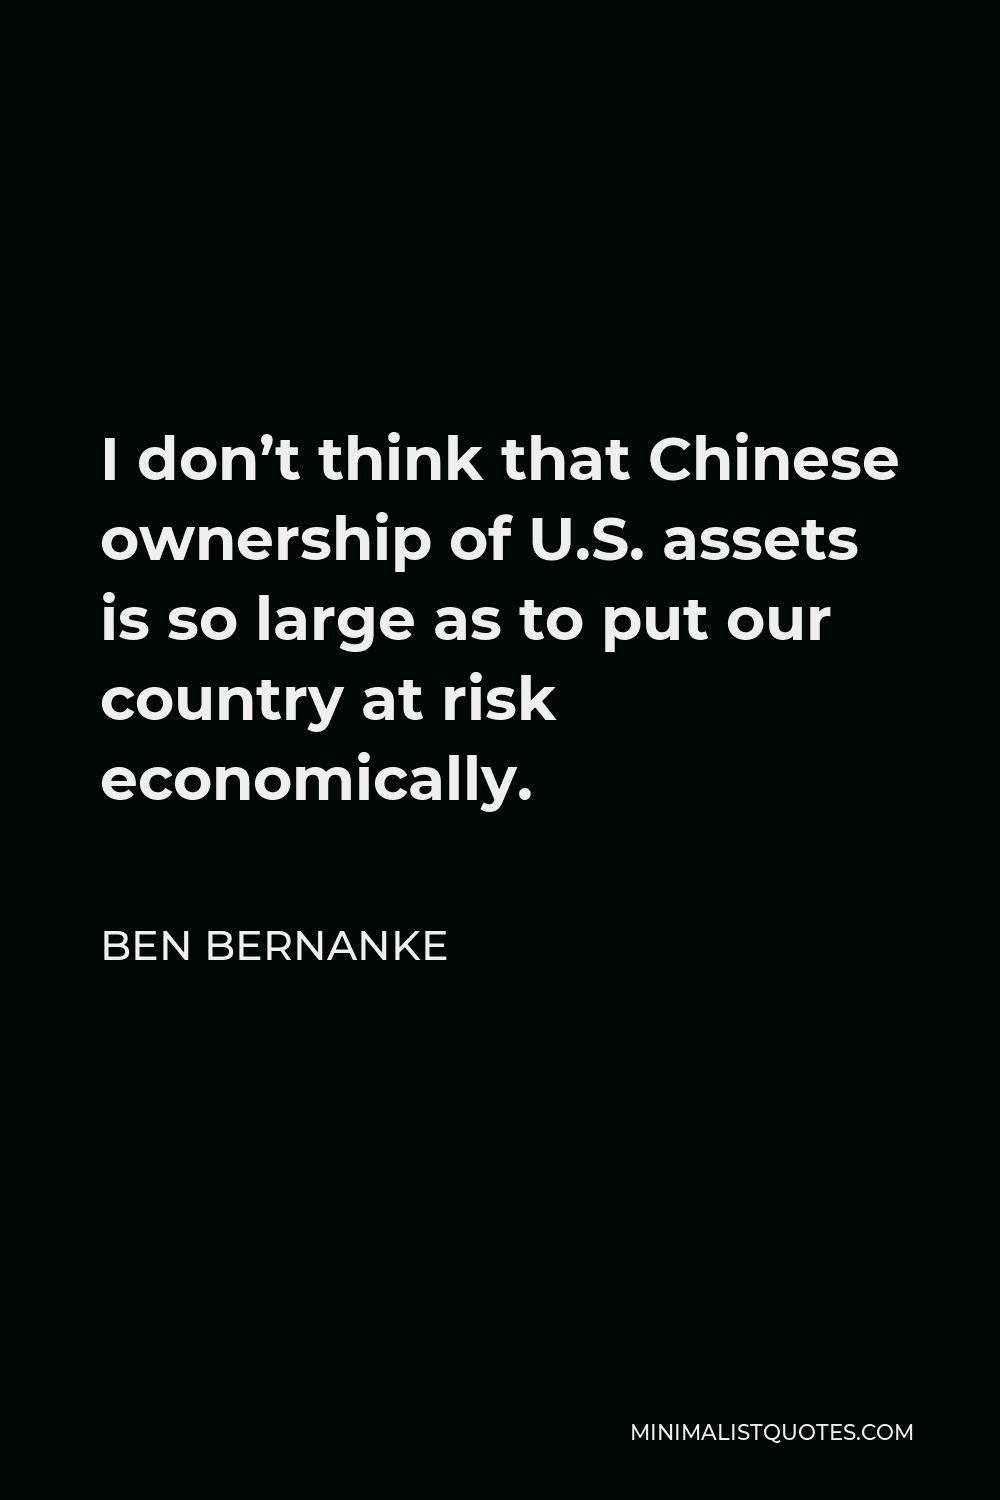 Ben Bernanke Quote - I don’t think that Chinese ownership of U.S. assets is so large as to put our country at risk economically.